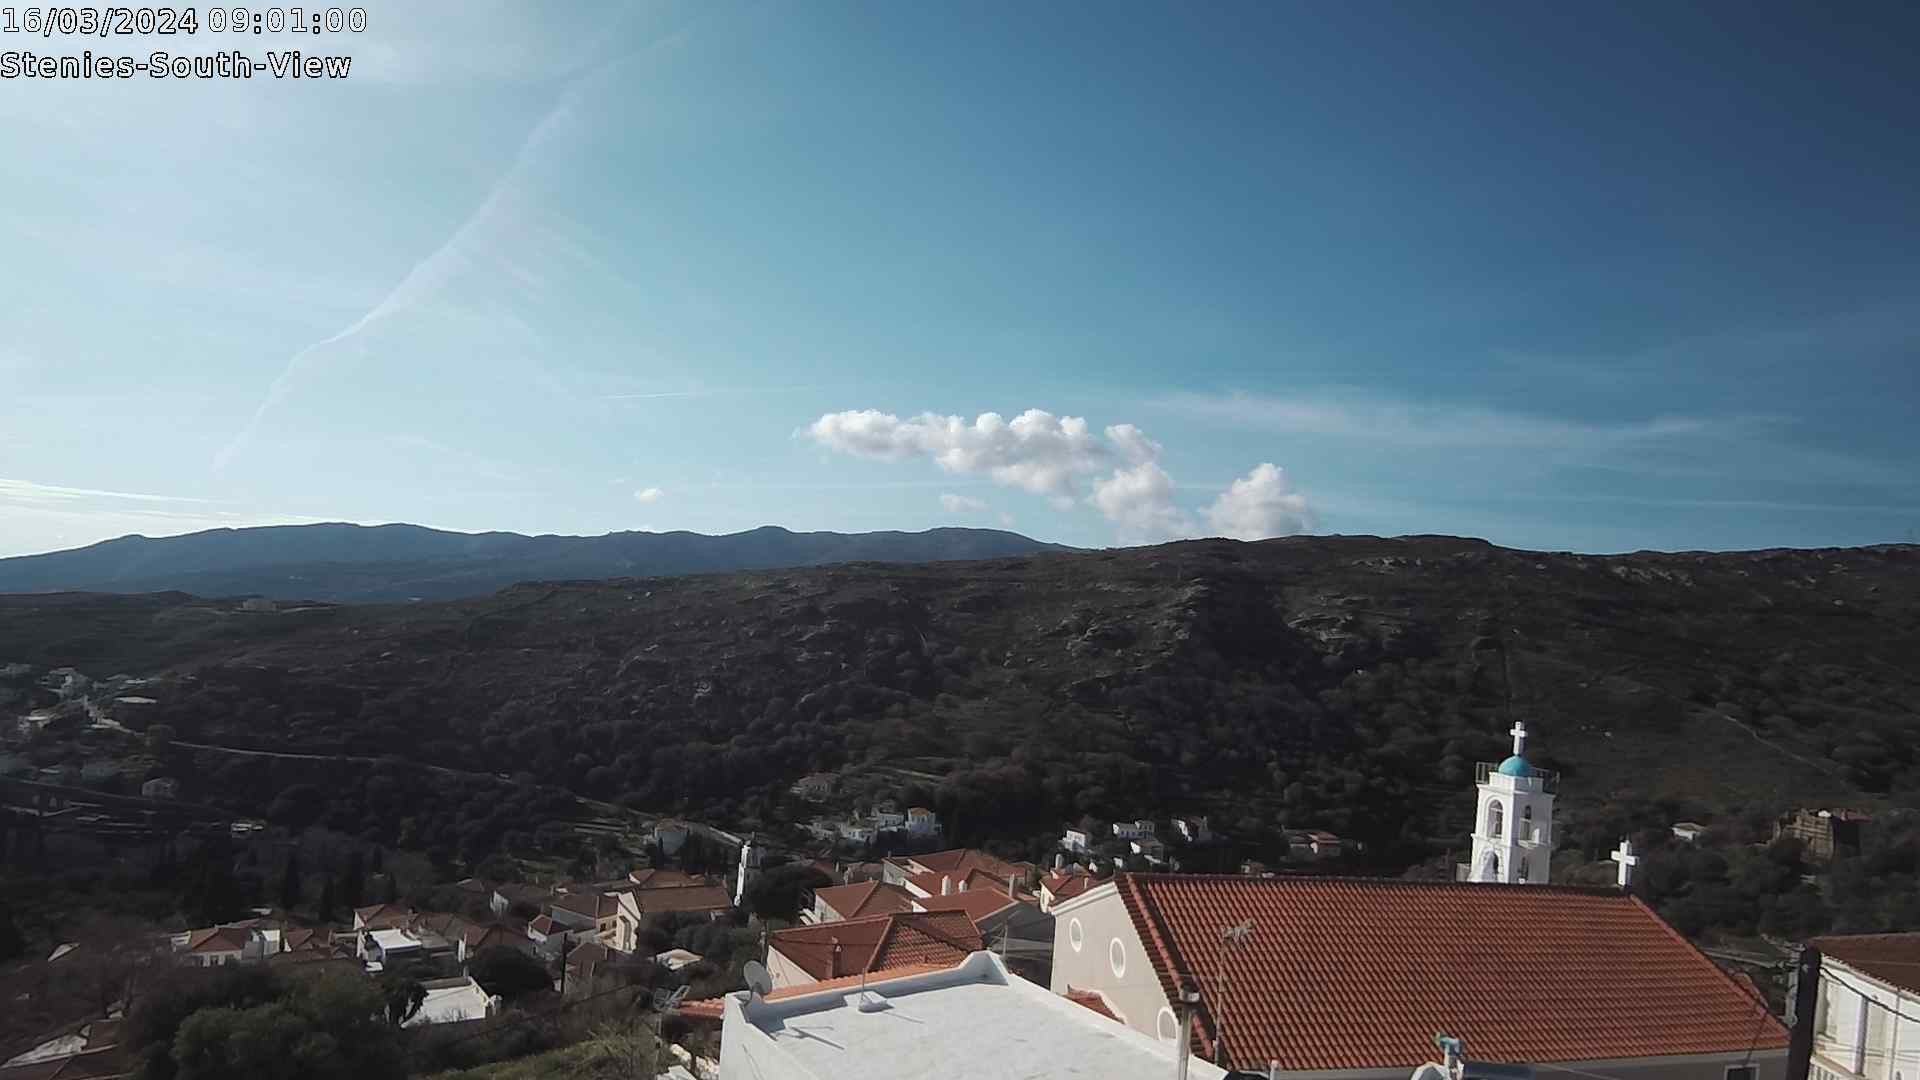 time-lapse frame, Stenies. Andros Island  South View webcam